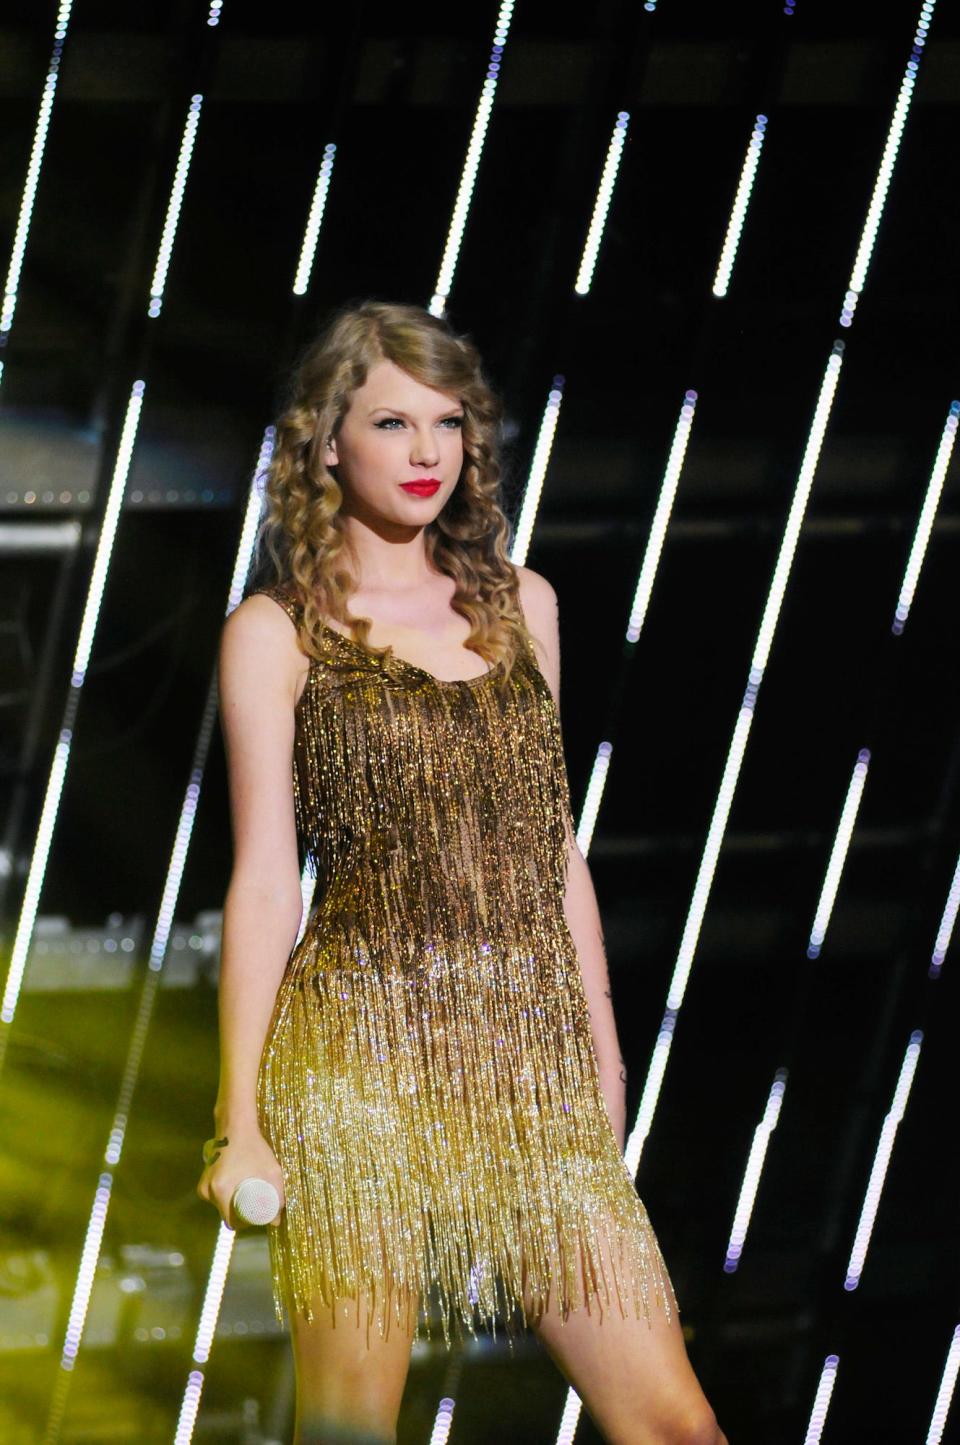 Taylor Swift performs at the CMA Music Festival on June 12, 2011.